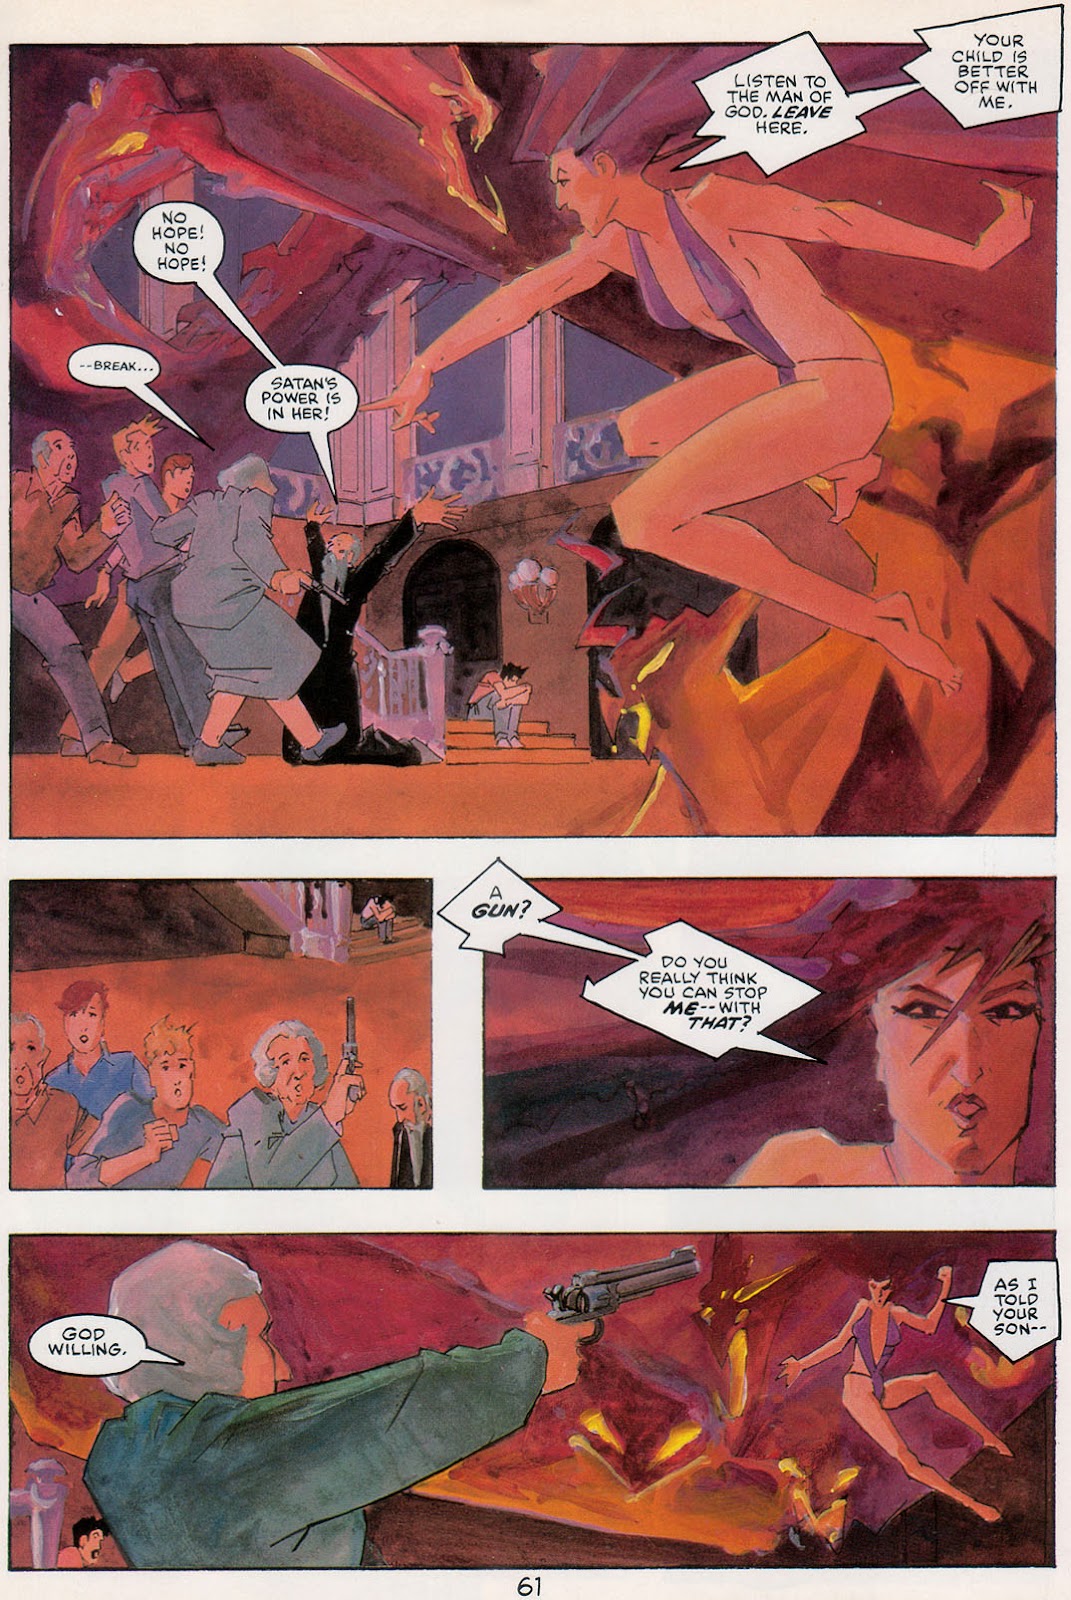 Marvel Graphic Novel issue 20 - Greenberg the Vampire - Page 65